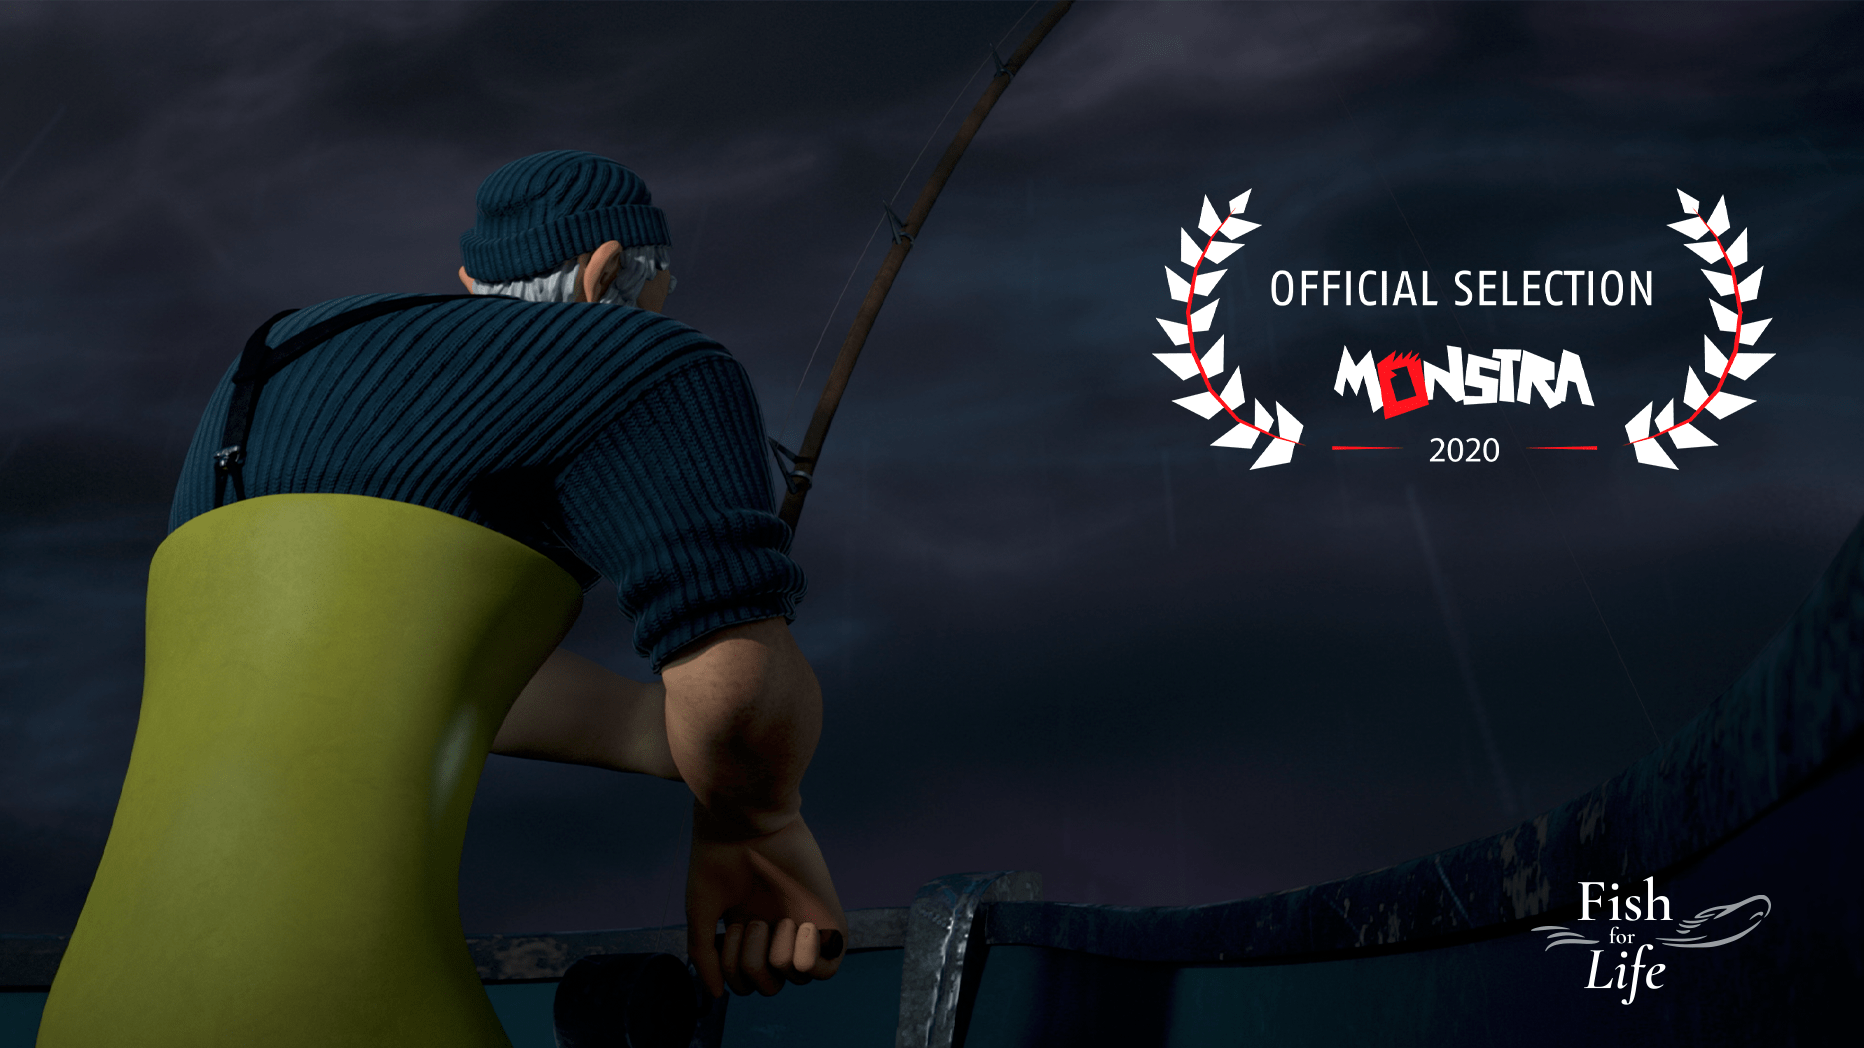 Official Selection at MONSTRA 2020 - Fish for Life